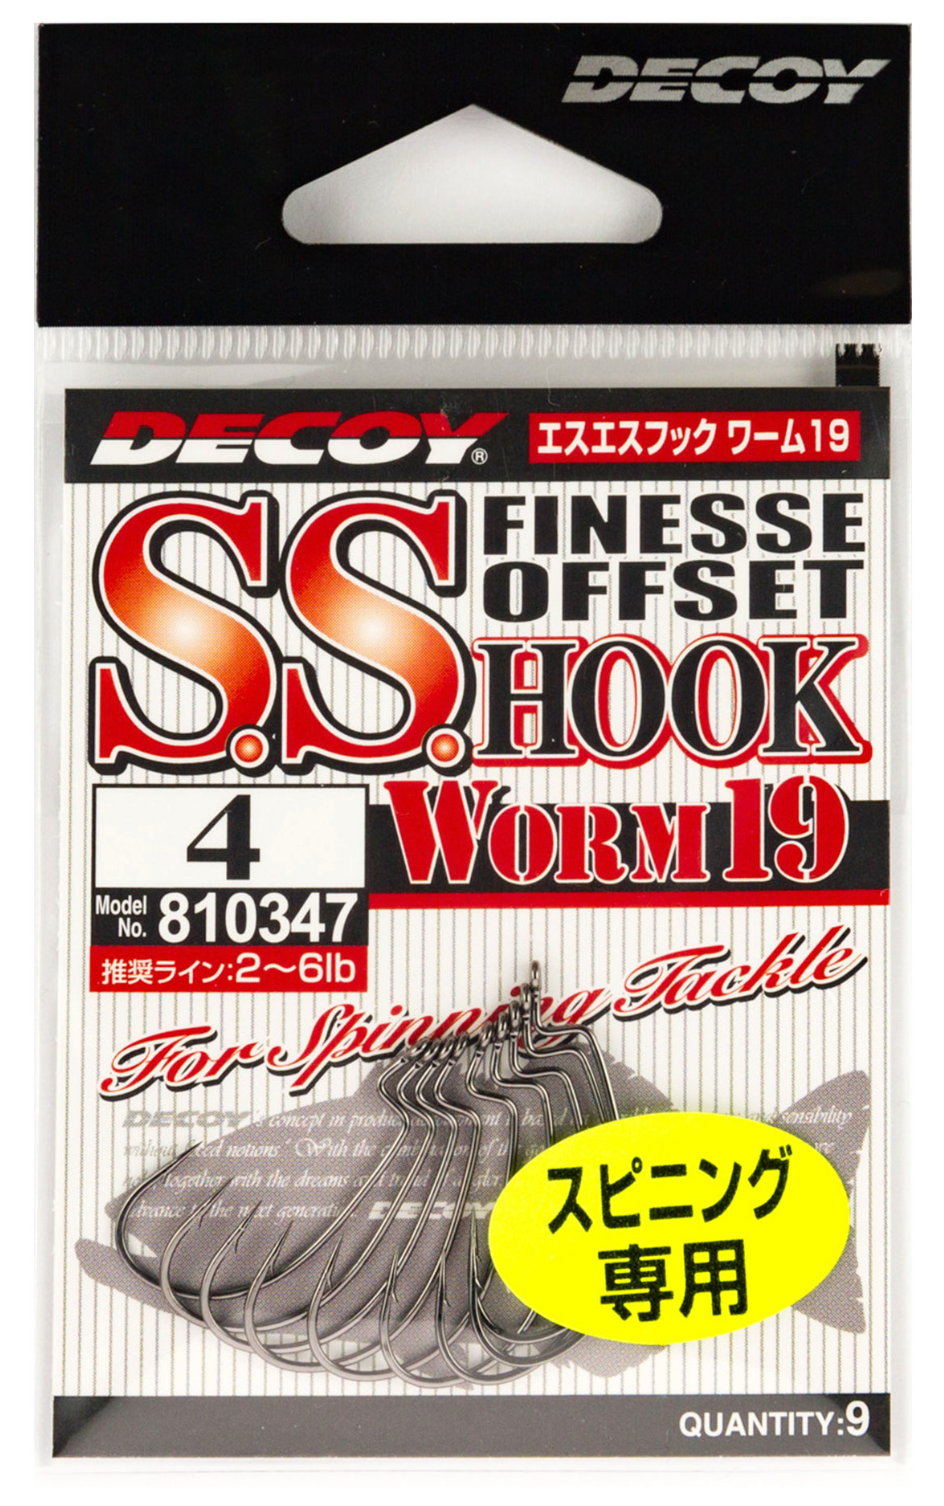 Decoy Worm 19 Finesse Offset S.S. Hook